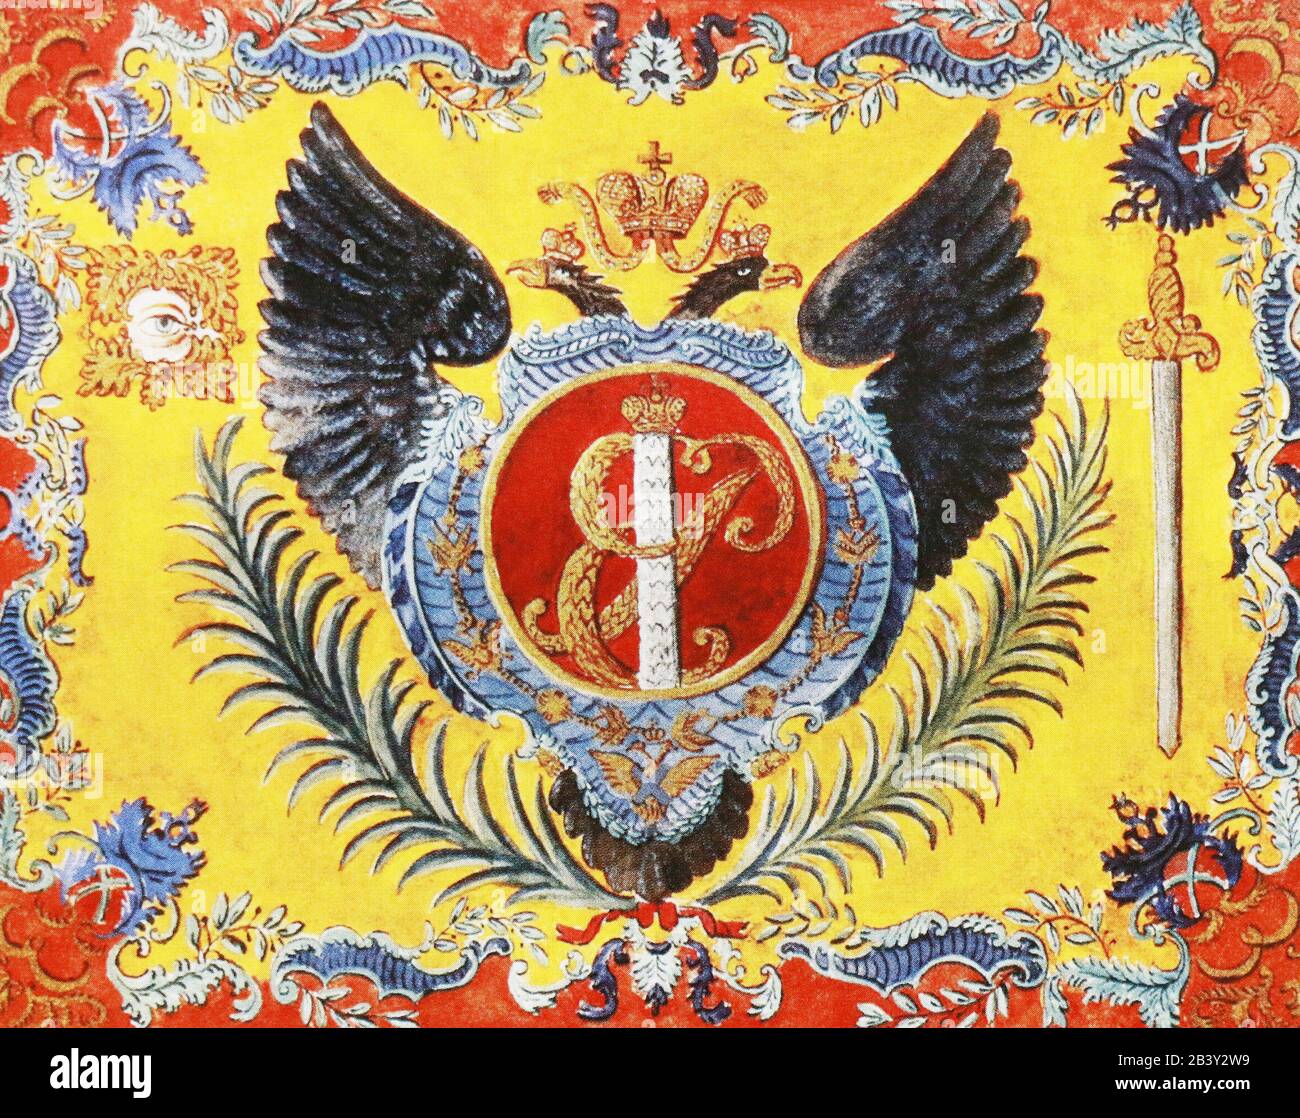 Double-headed eagle on the company banner of the Life Guards company of the Preobrazhensky Regiment in the 18th century. Stock Photo